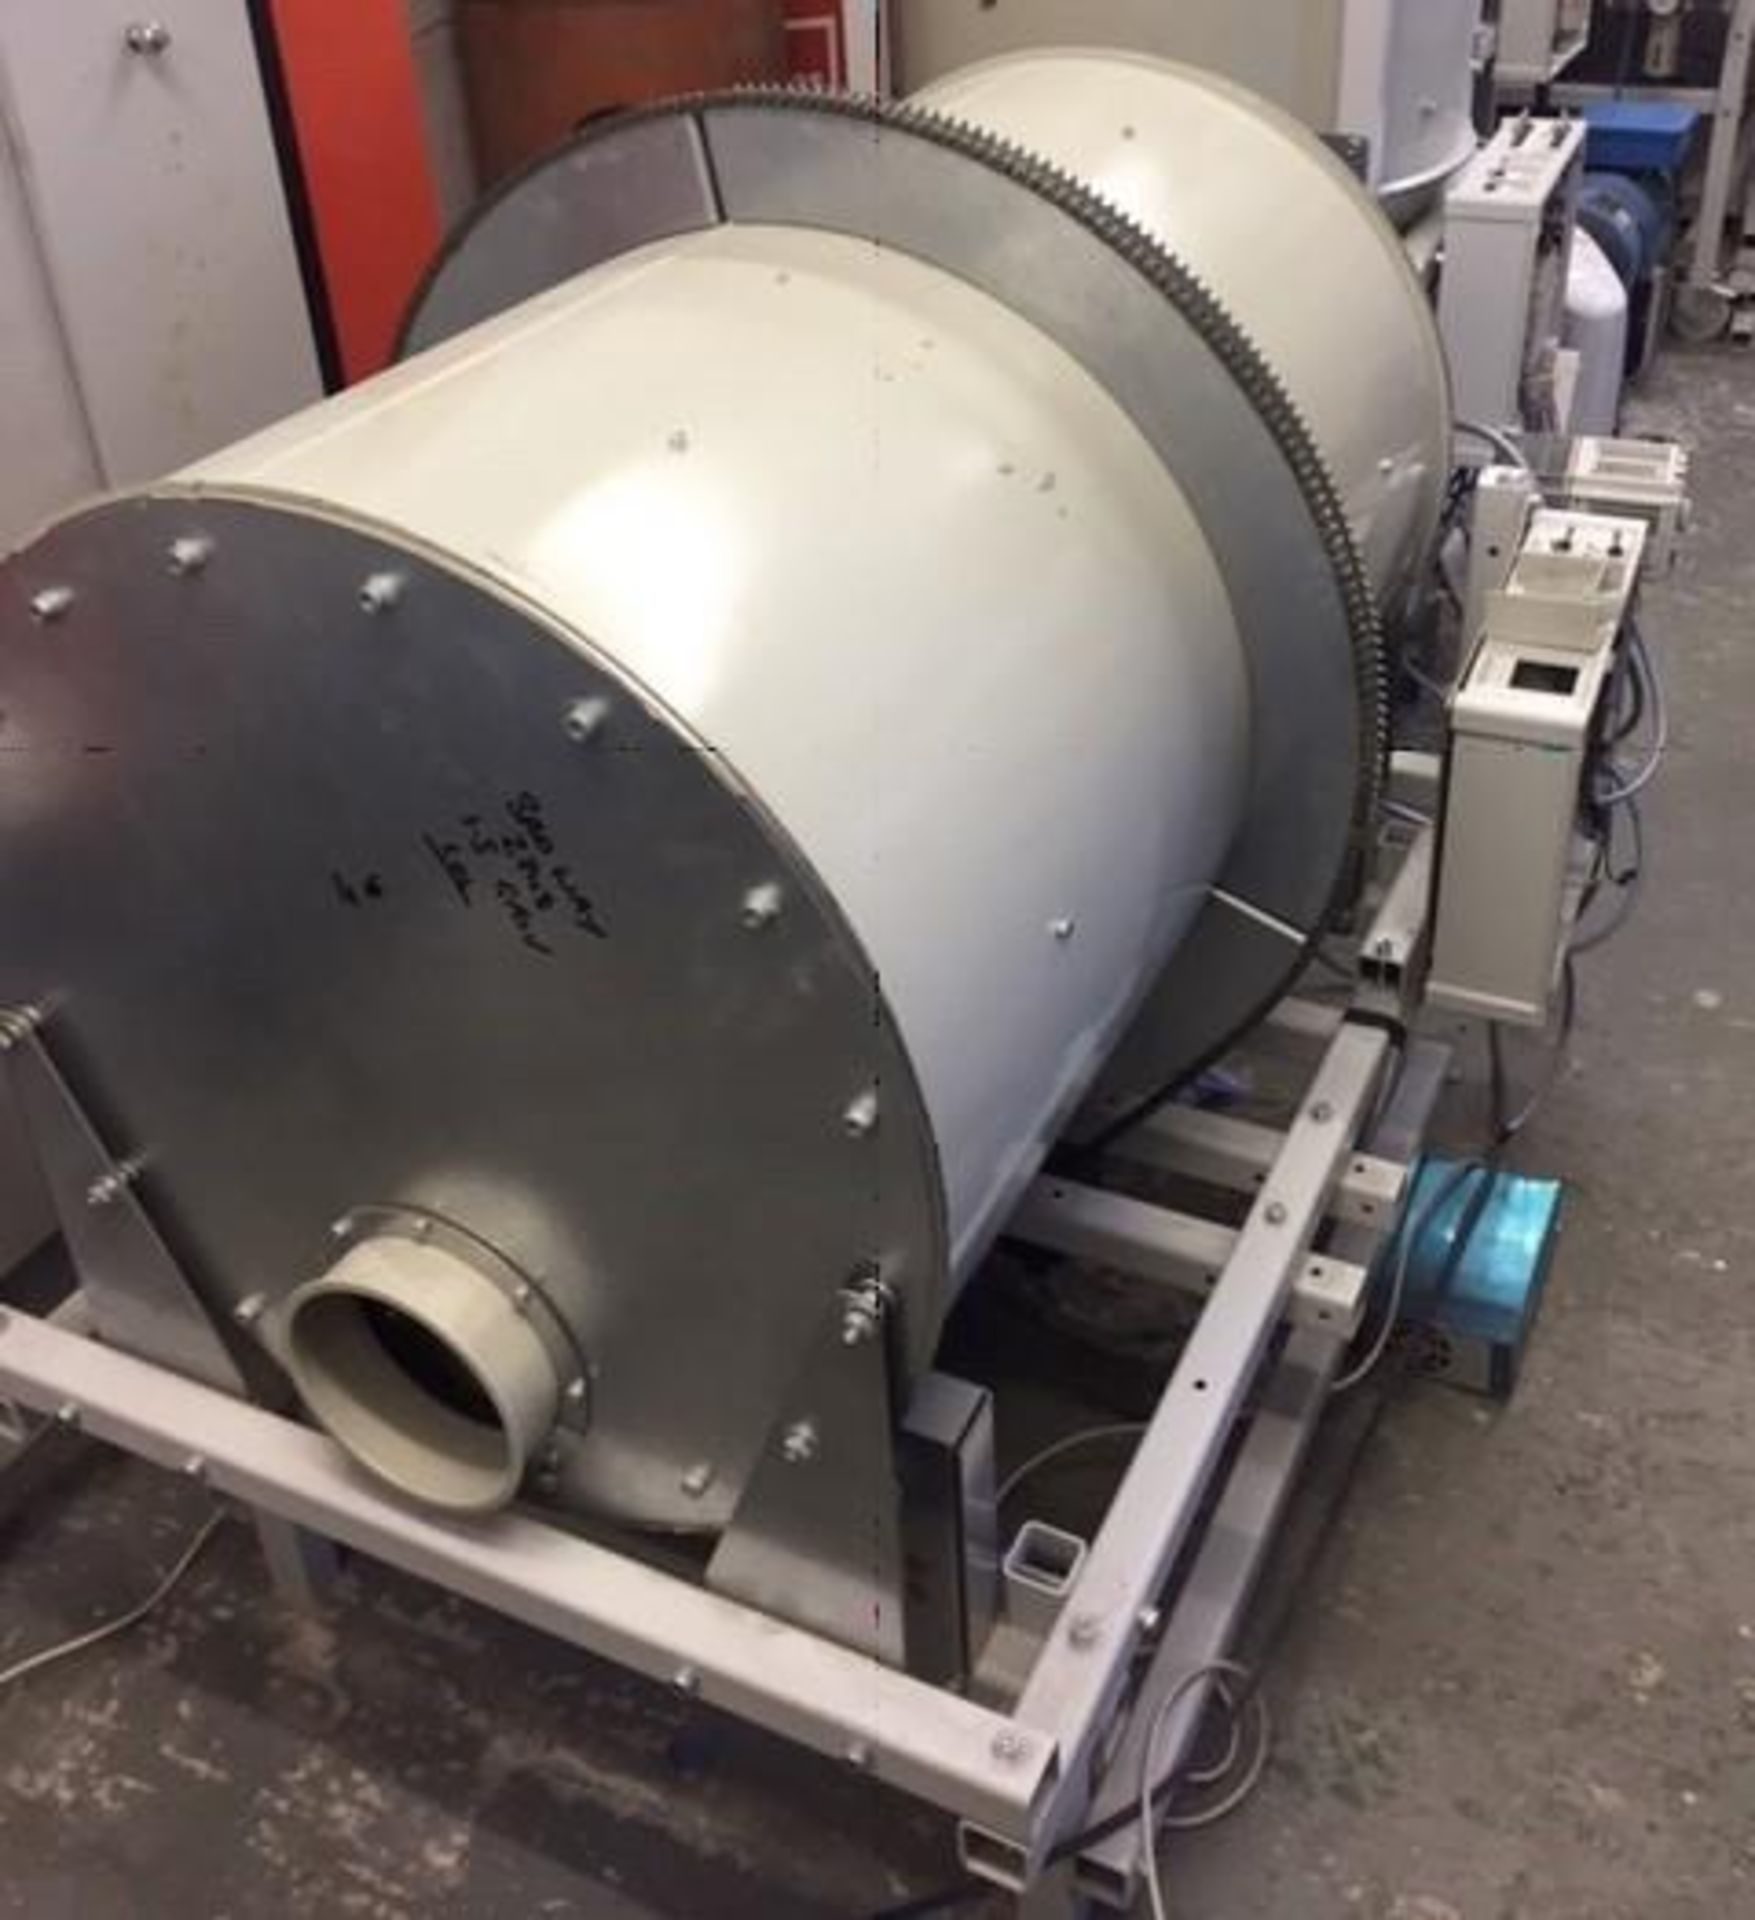 1 x Rotary Spray Dryer (600mm diameter x 1000mm) - Year Of Manufacture 2015 - HK246 PC